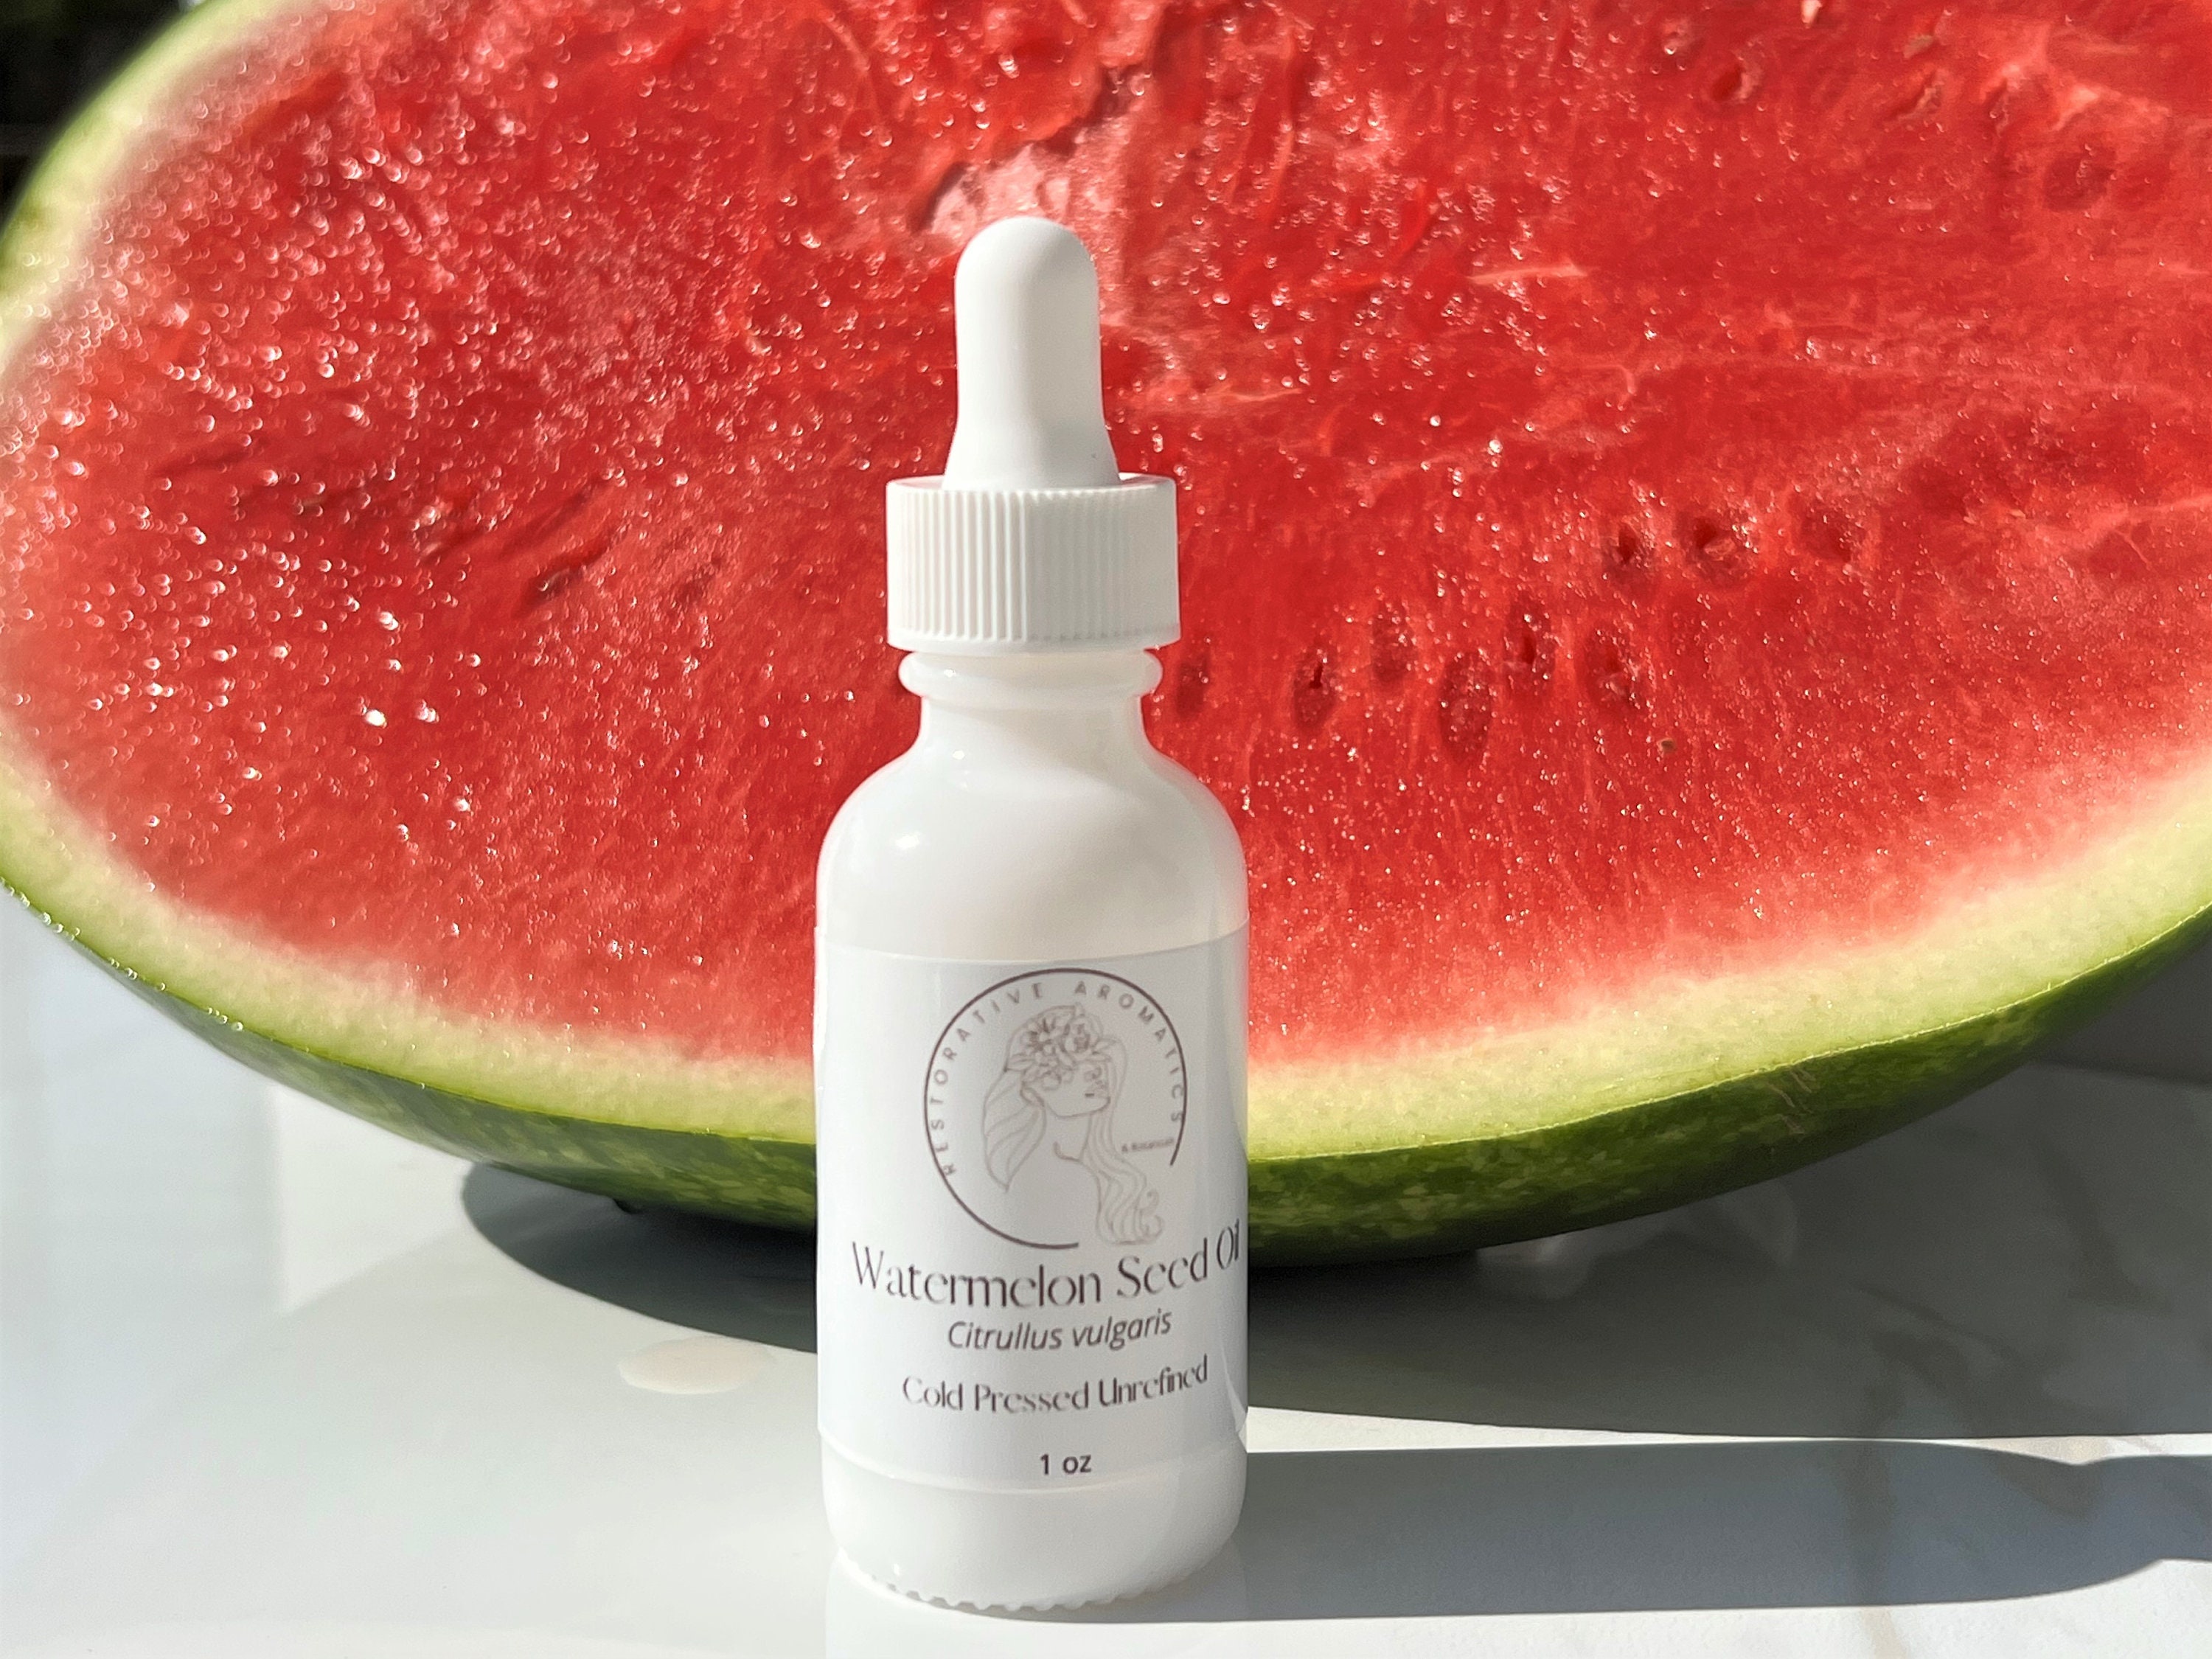 100% Kalahari Watermelon Seed Oil Cold Pressed / Virgin / Undiluted Carrier Oil. for Face, Hair and Body